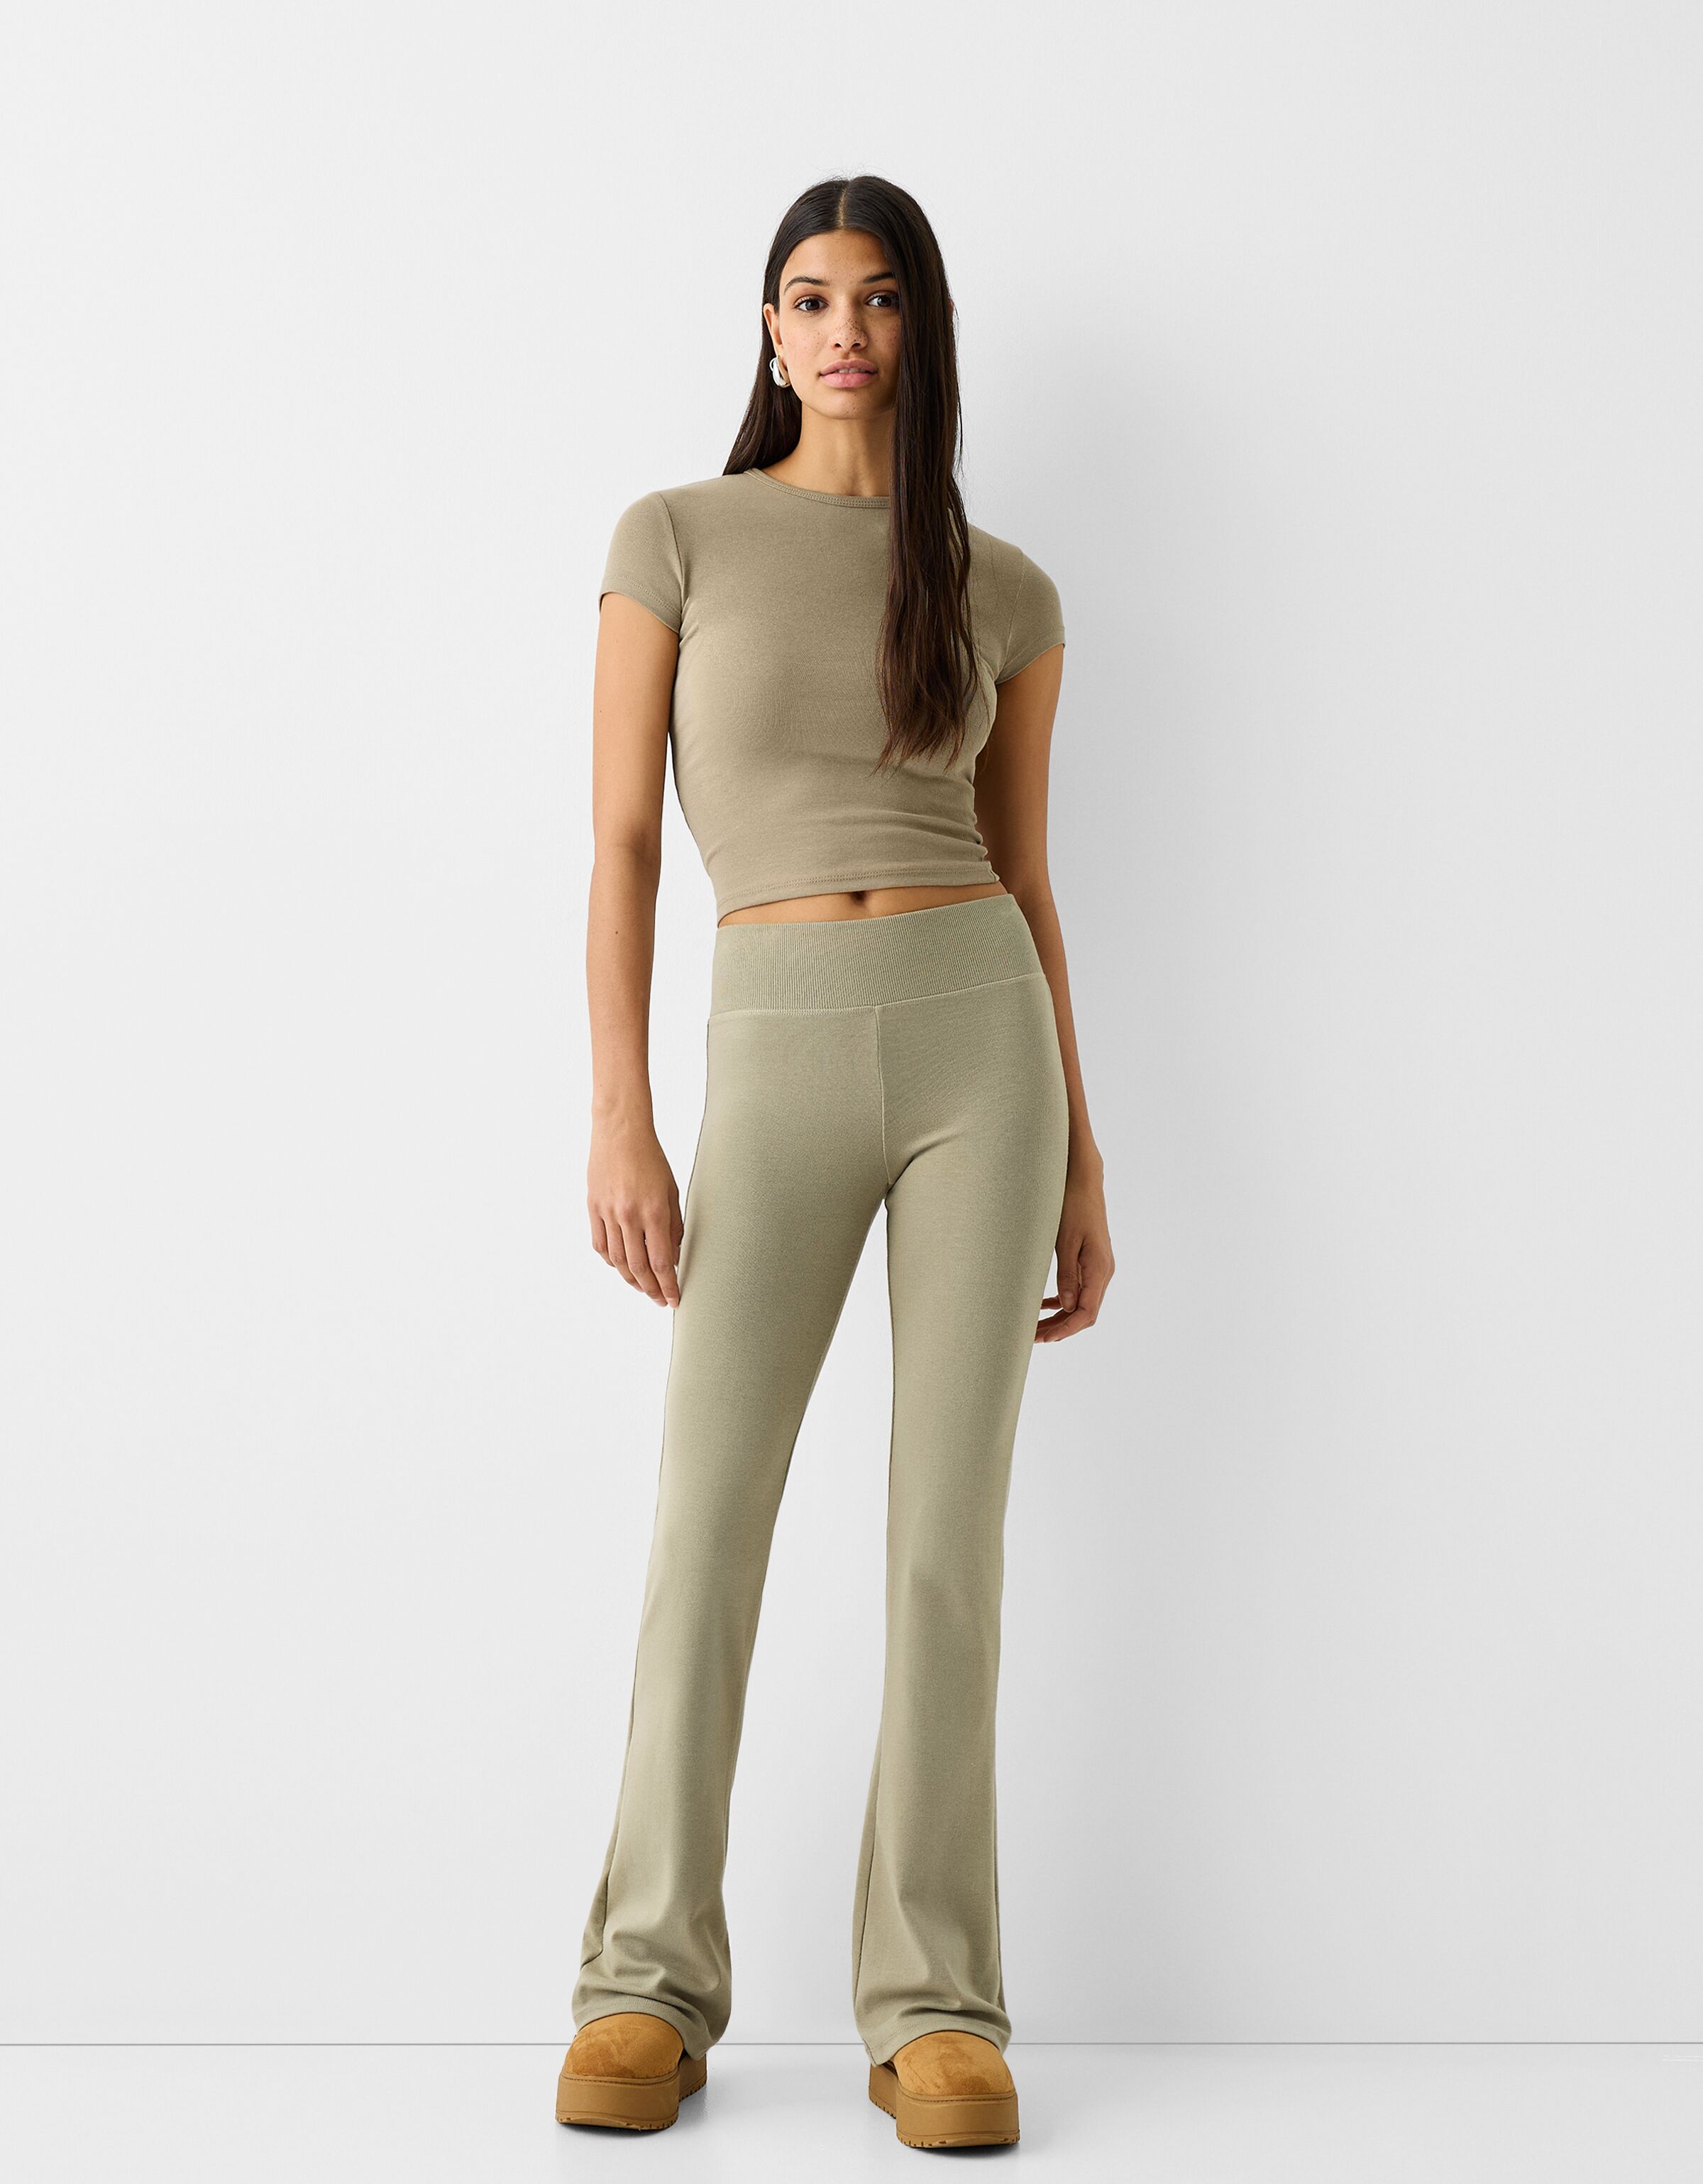 Reyna Two Piece Set - Crop Top and Tailored Pants Set in Green | Showpo USA